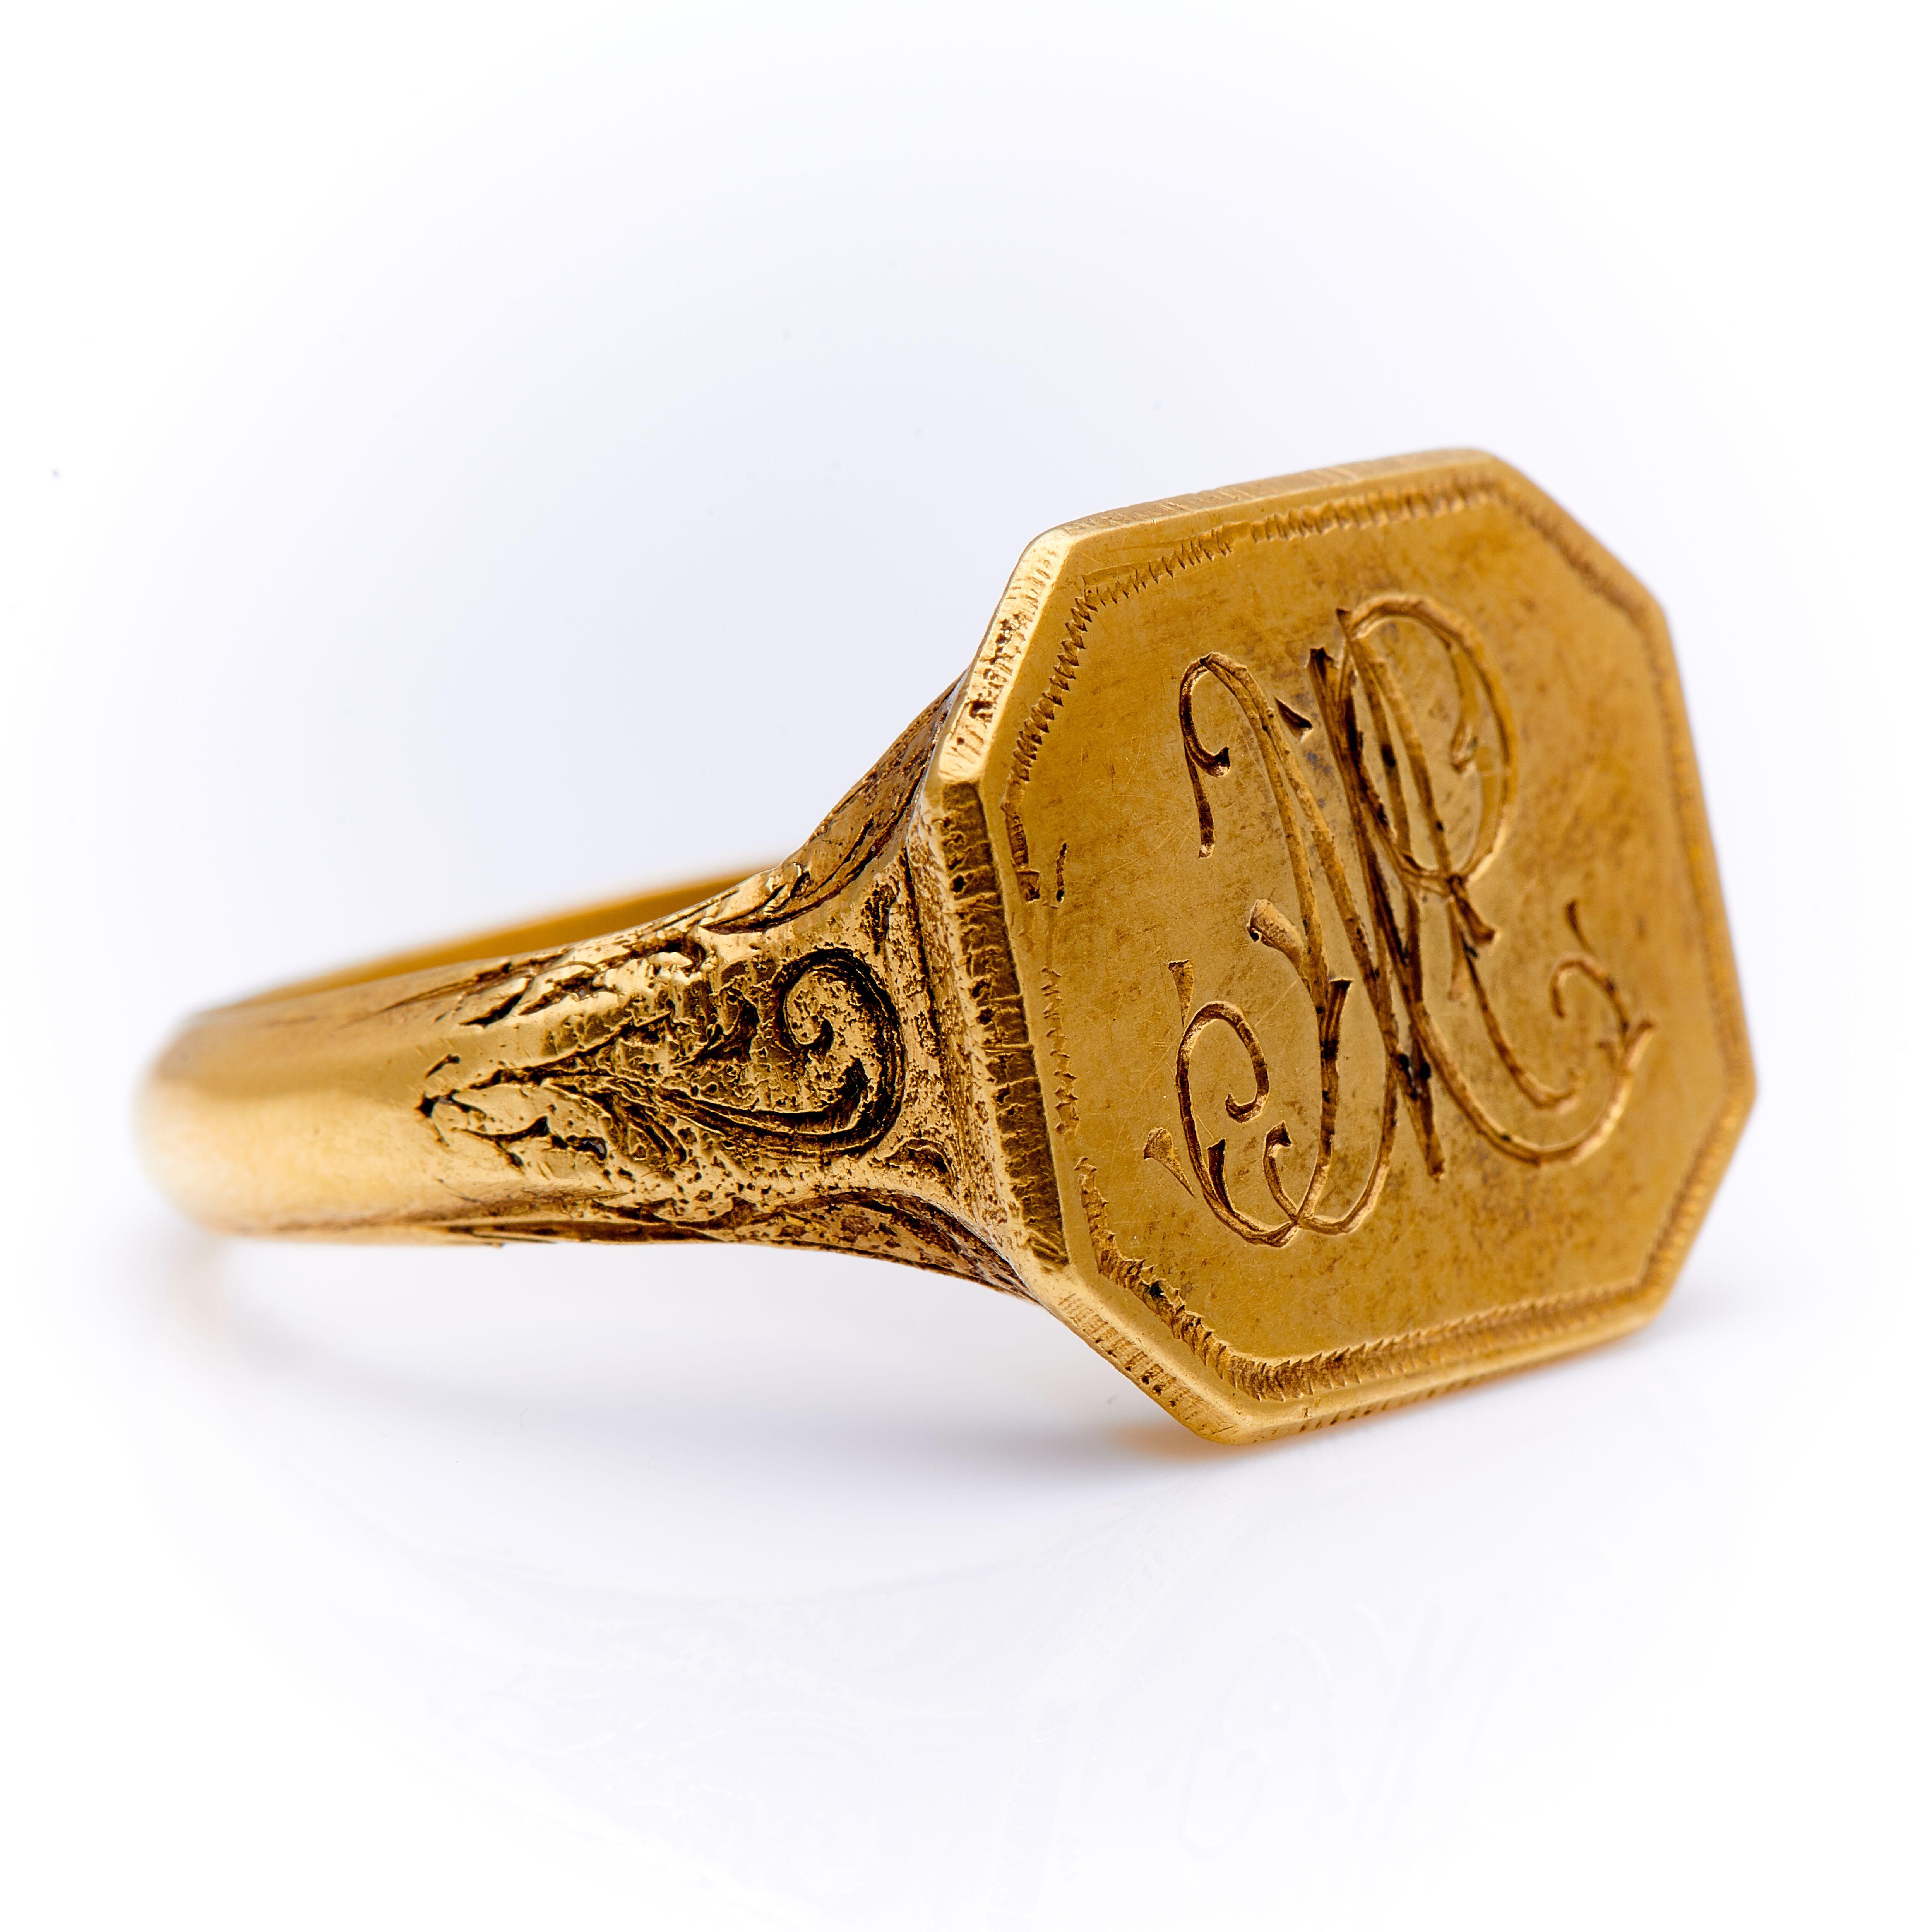 18th century, gold signet ring from England, circa 1790. An impressive heavy gold signet ring, the central square plaque is engraved with a elaborate letter ‘M’ and framed by incised beaded edging. The ornate engraved decoration continues underneath